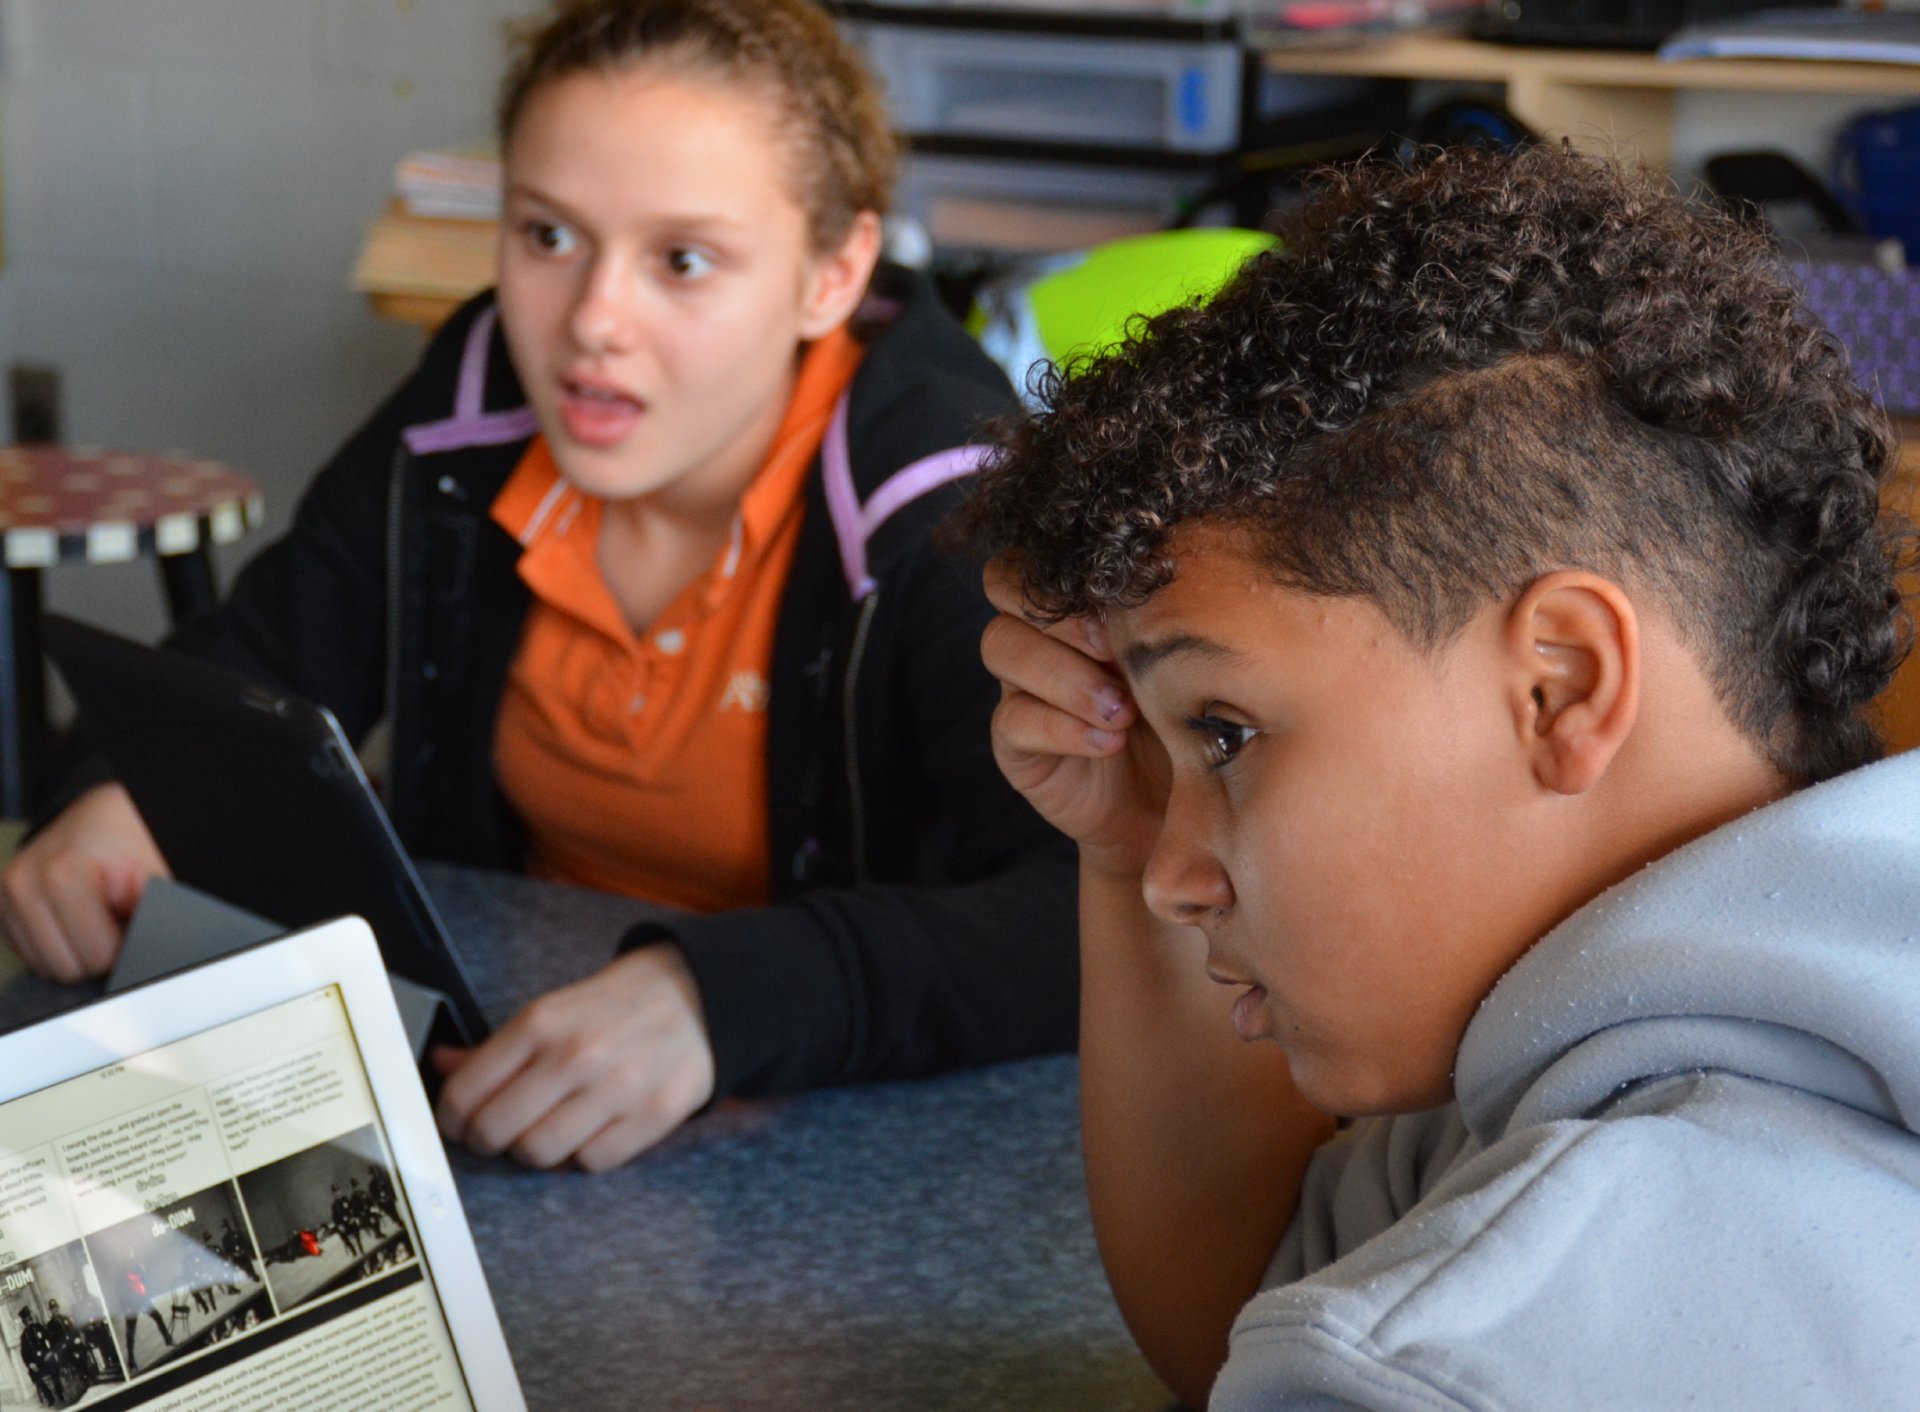 Two students looking intently at a laptop screen displaying the Amplify ELA curriculum in a classroom setting, one resting their head on their hand.